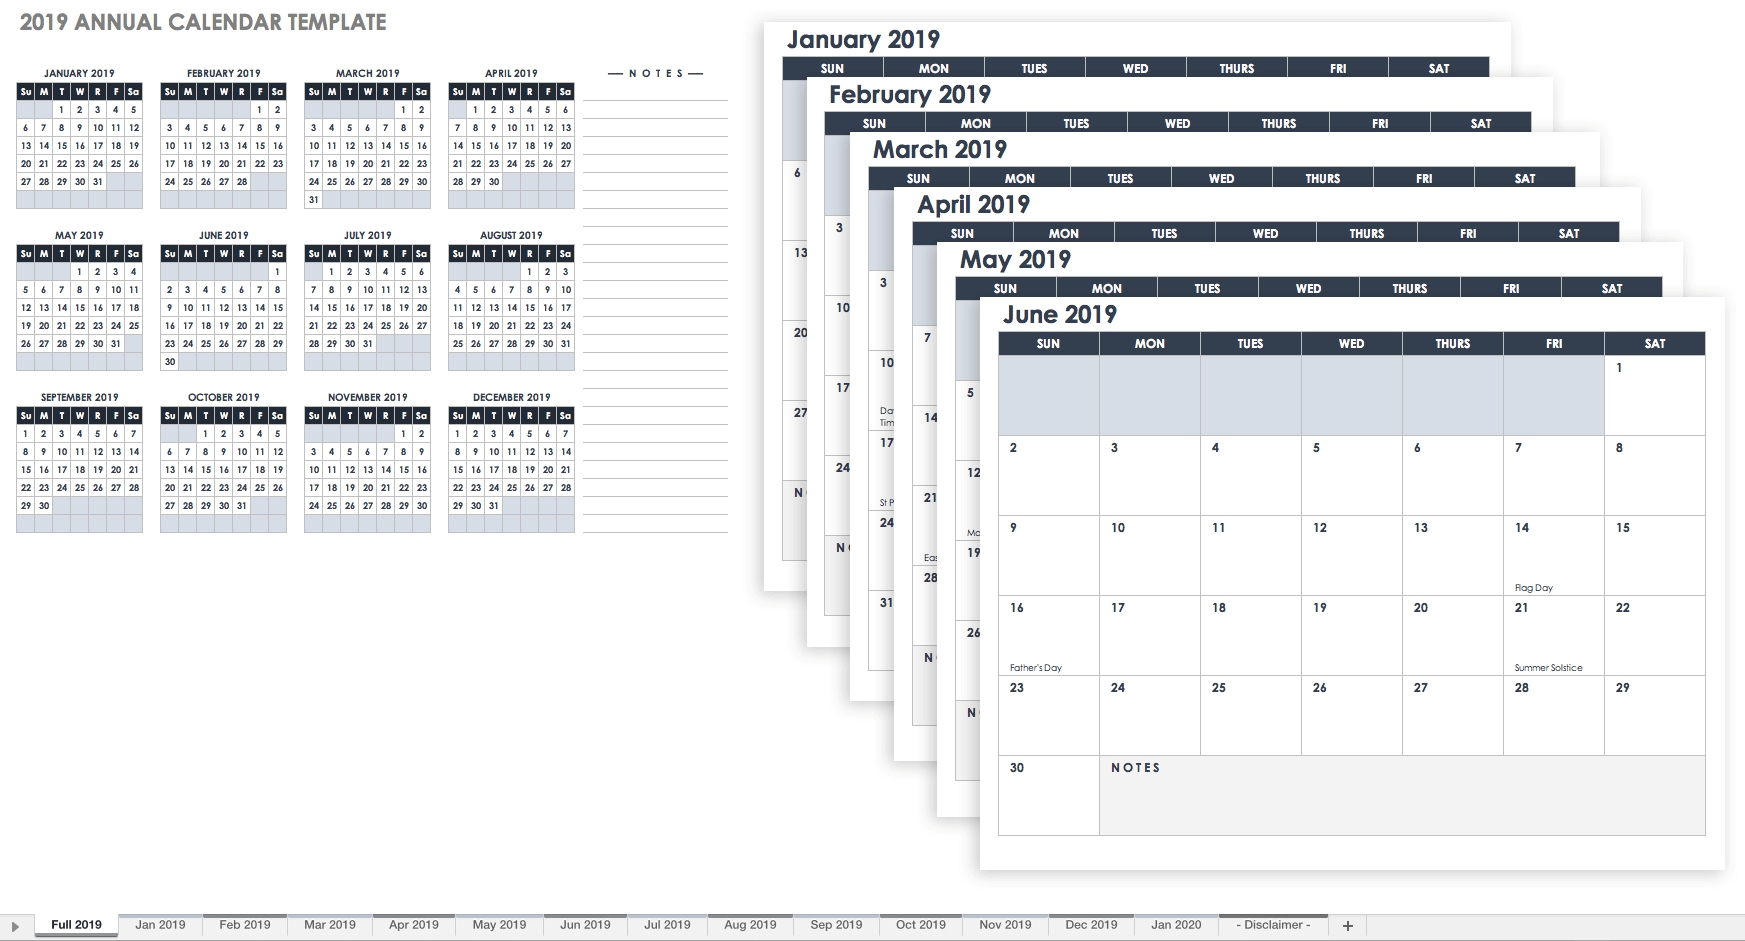 15 Free Monthly Calendar Templates | Smartsheet How To Make A Calendar Template In Photoshop